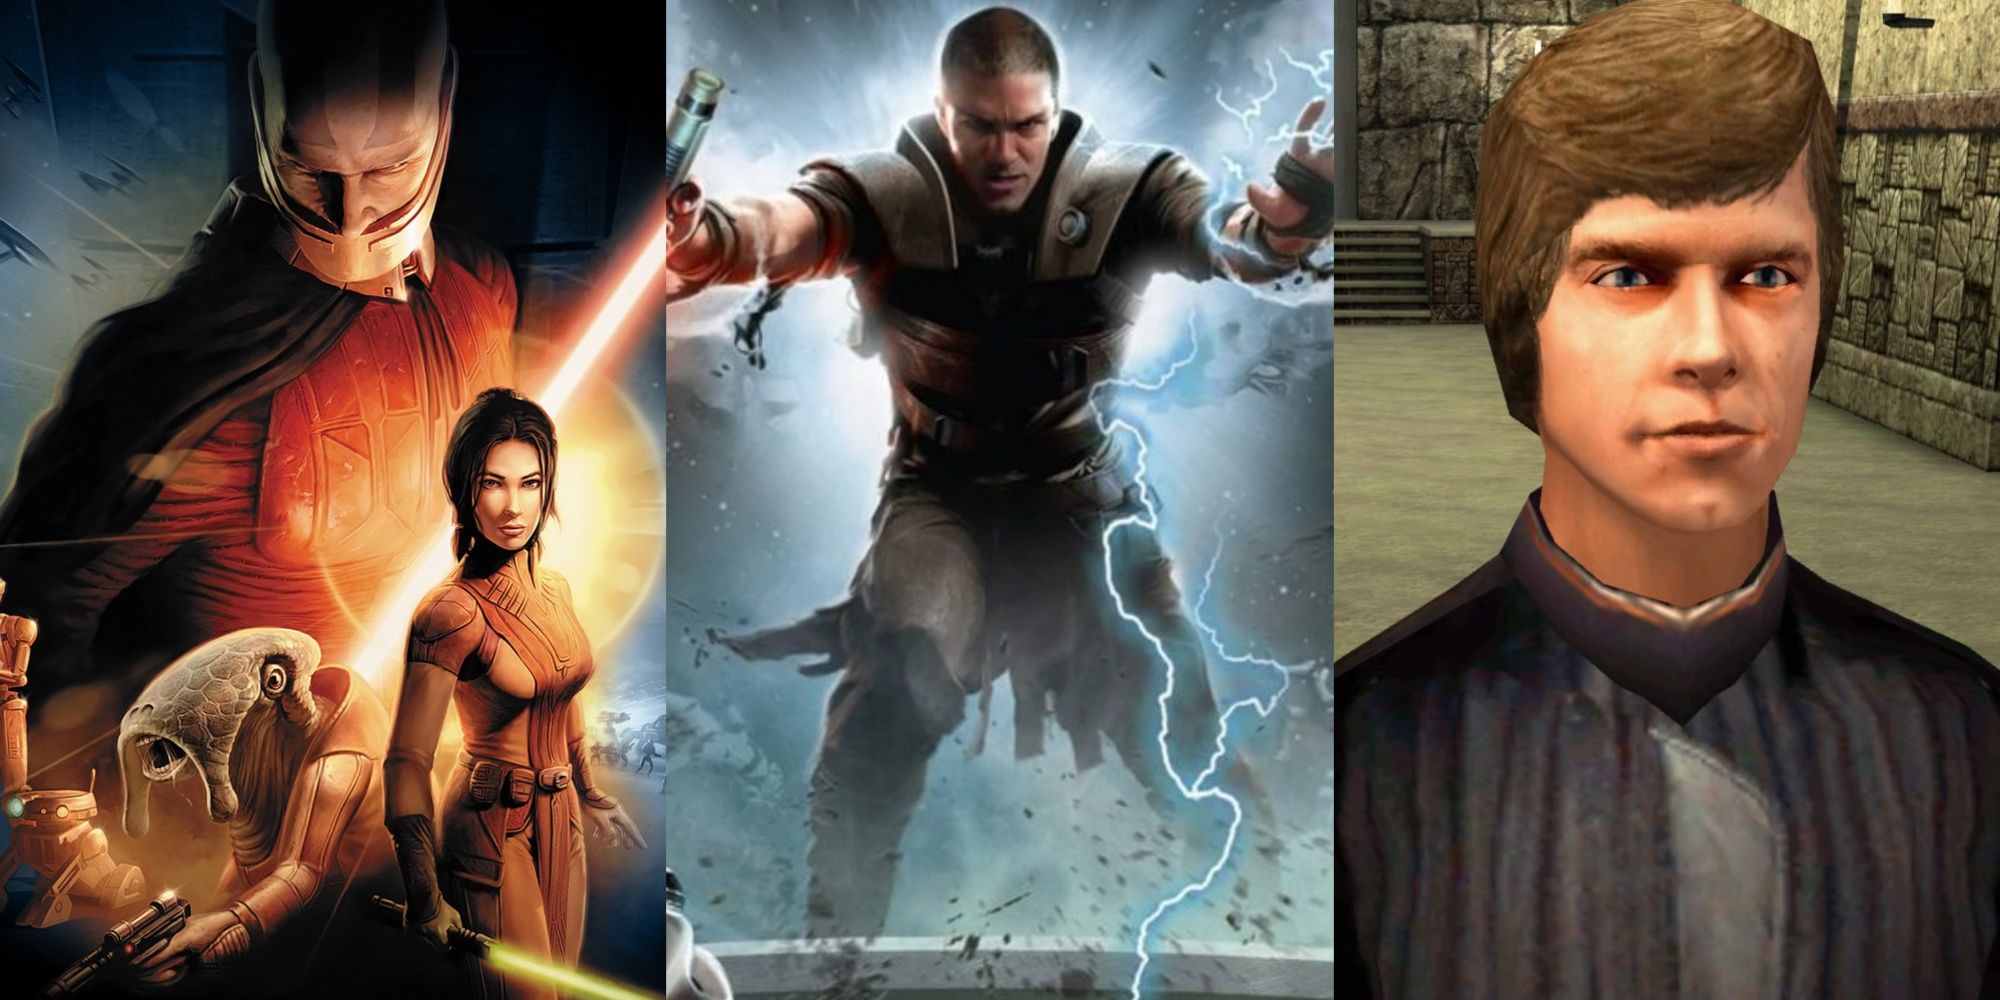 star wars knights of the old republic, the force unleashed cover art, and luke skywalker in jedi academy